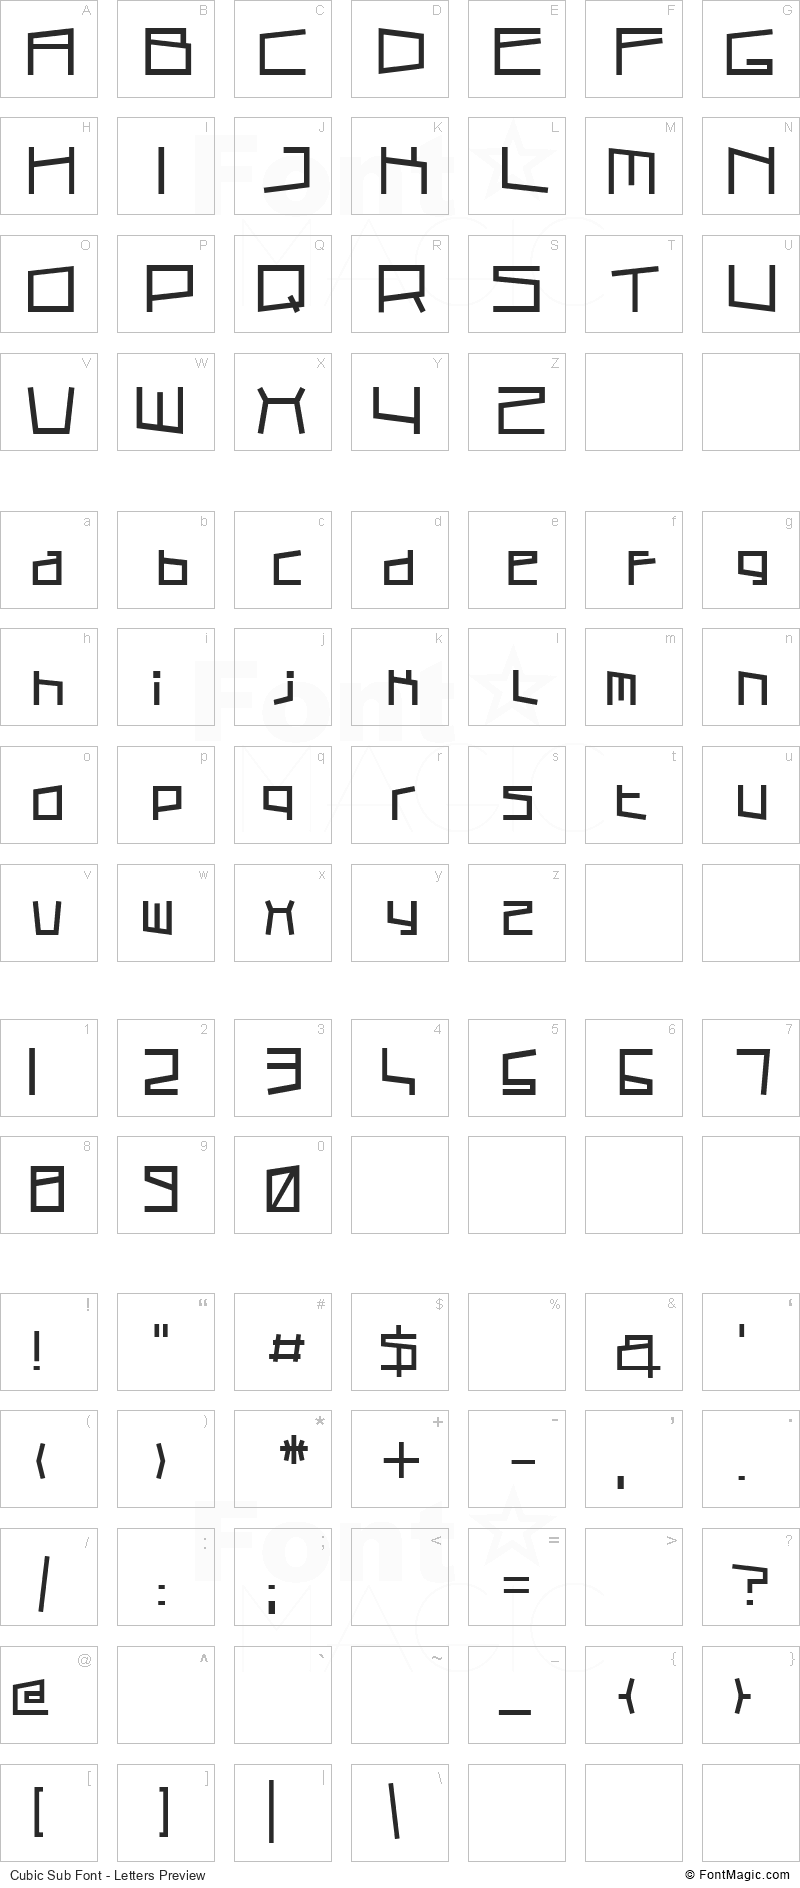 Cubic Sub Font - All Latters Preview Chart